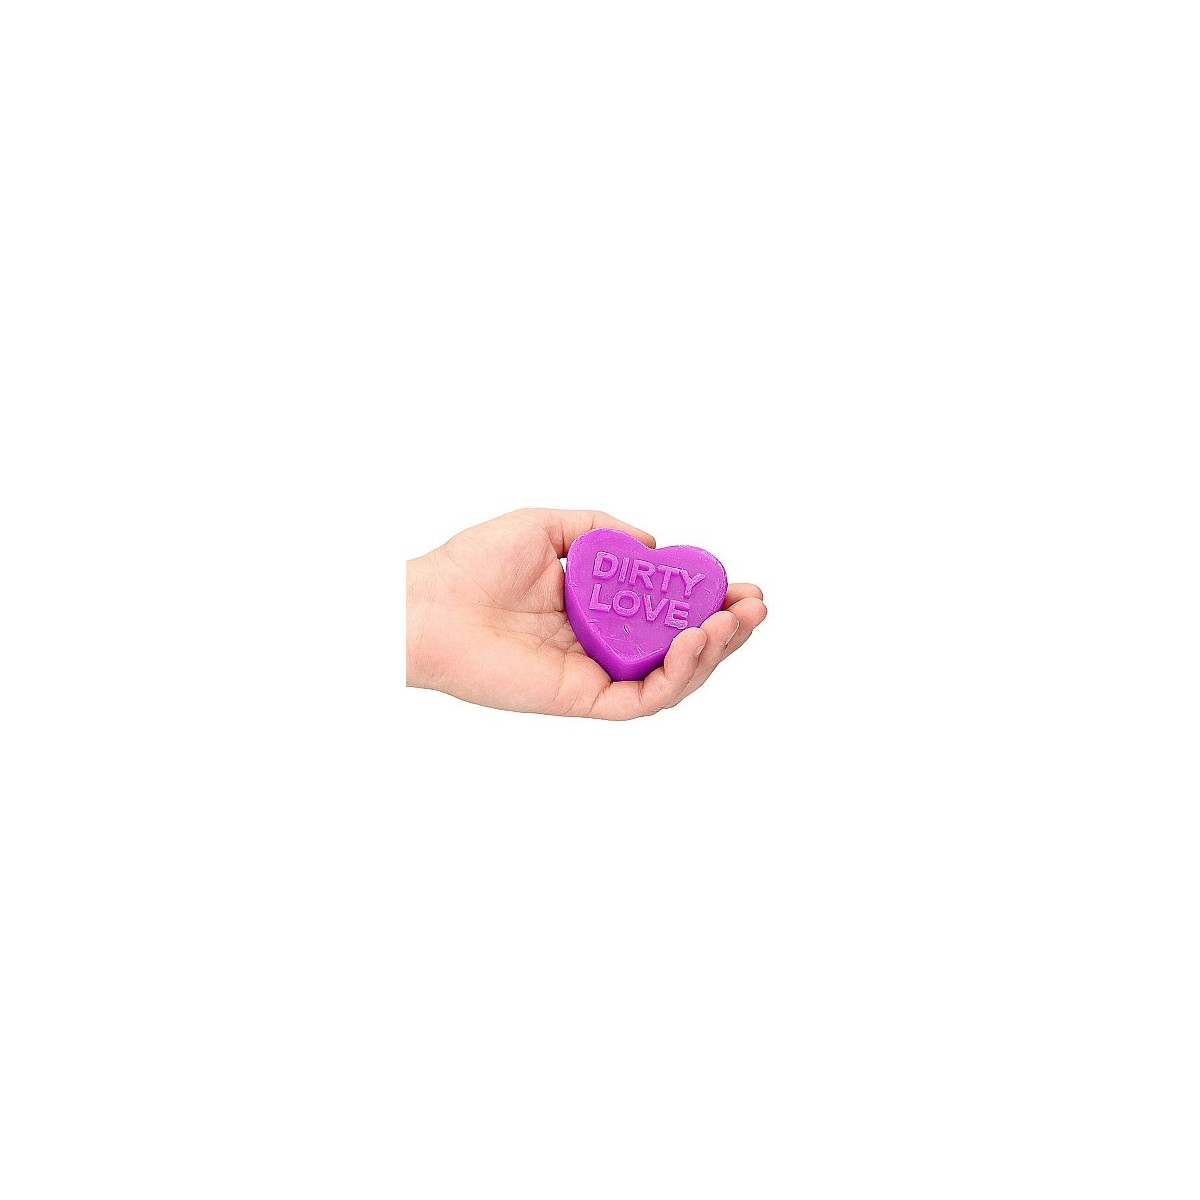 Sapone a cuore Heart Soap - Dirty Love - Lavender Scented